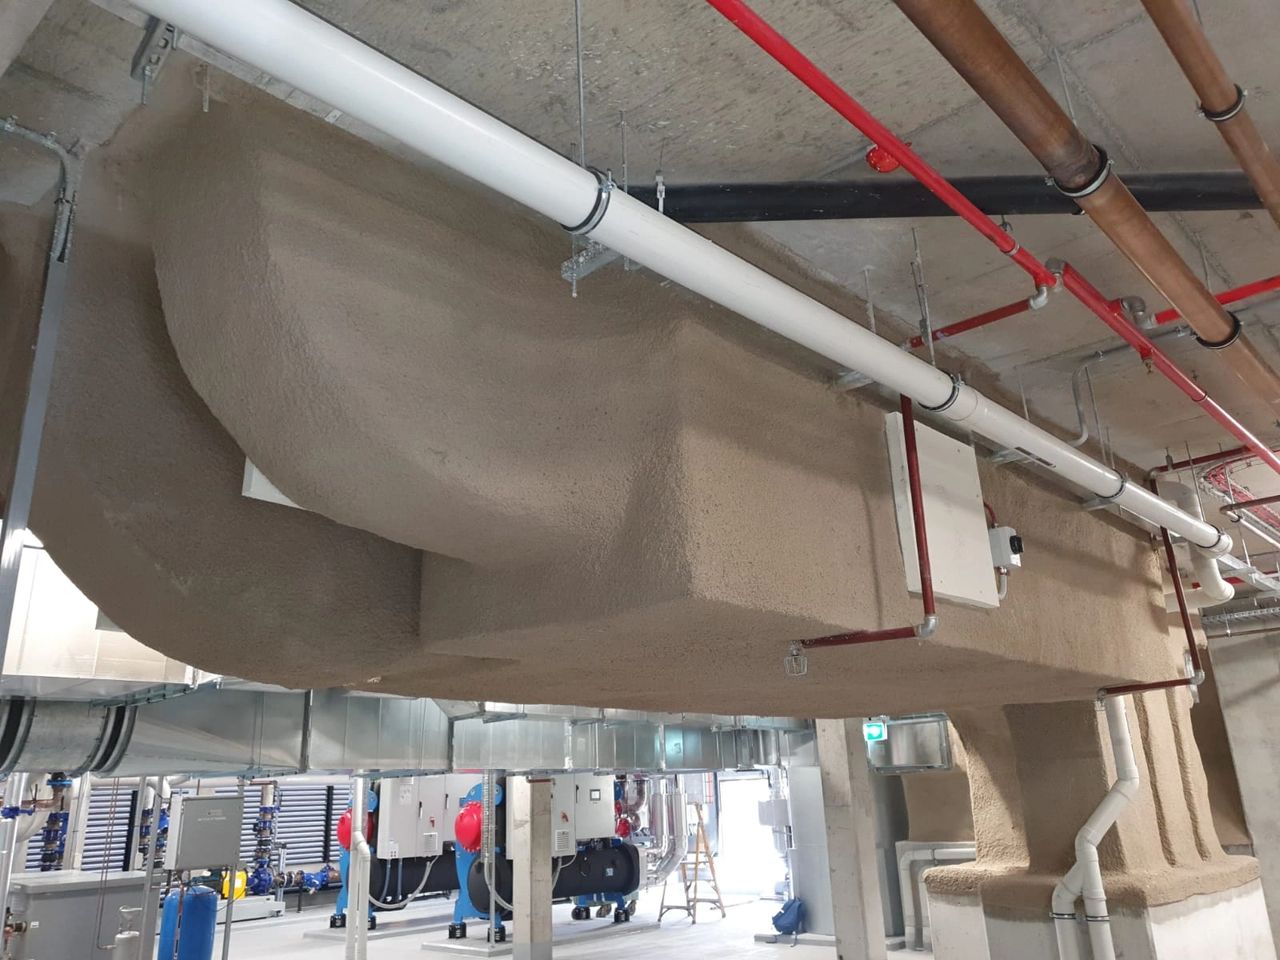 Duct fire protection with fire rated access panel using vermiculite spray